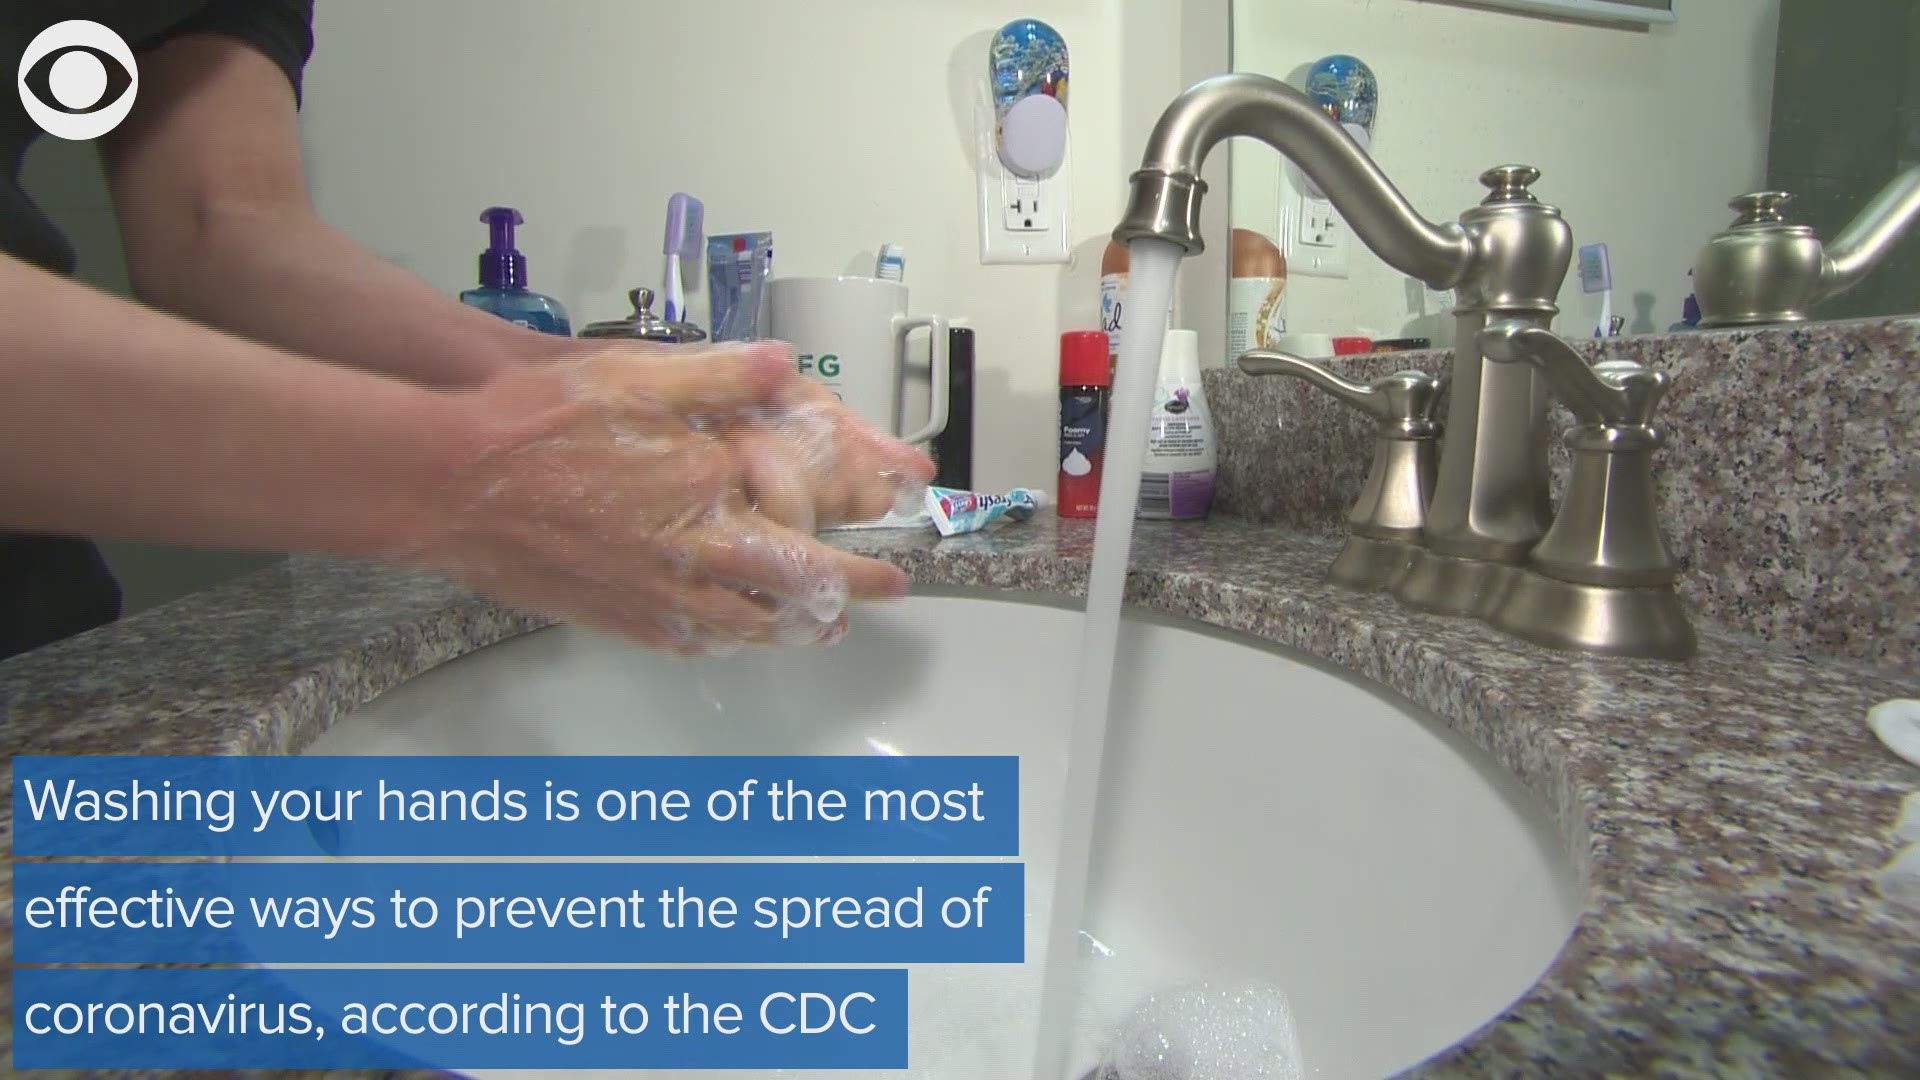 The Centers for Disease Control and Prevention says washing your hands is a good way to prevent the spread of viruses like the coronavirus.  Here are five tips.